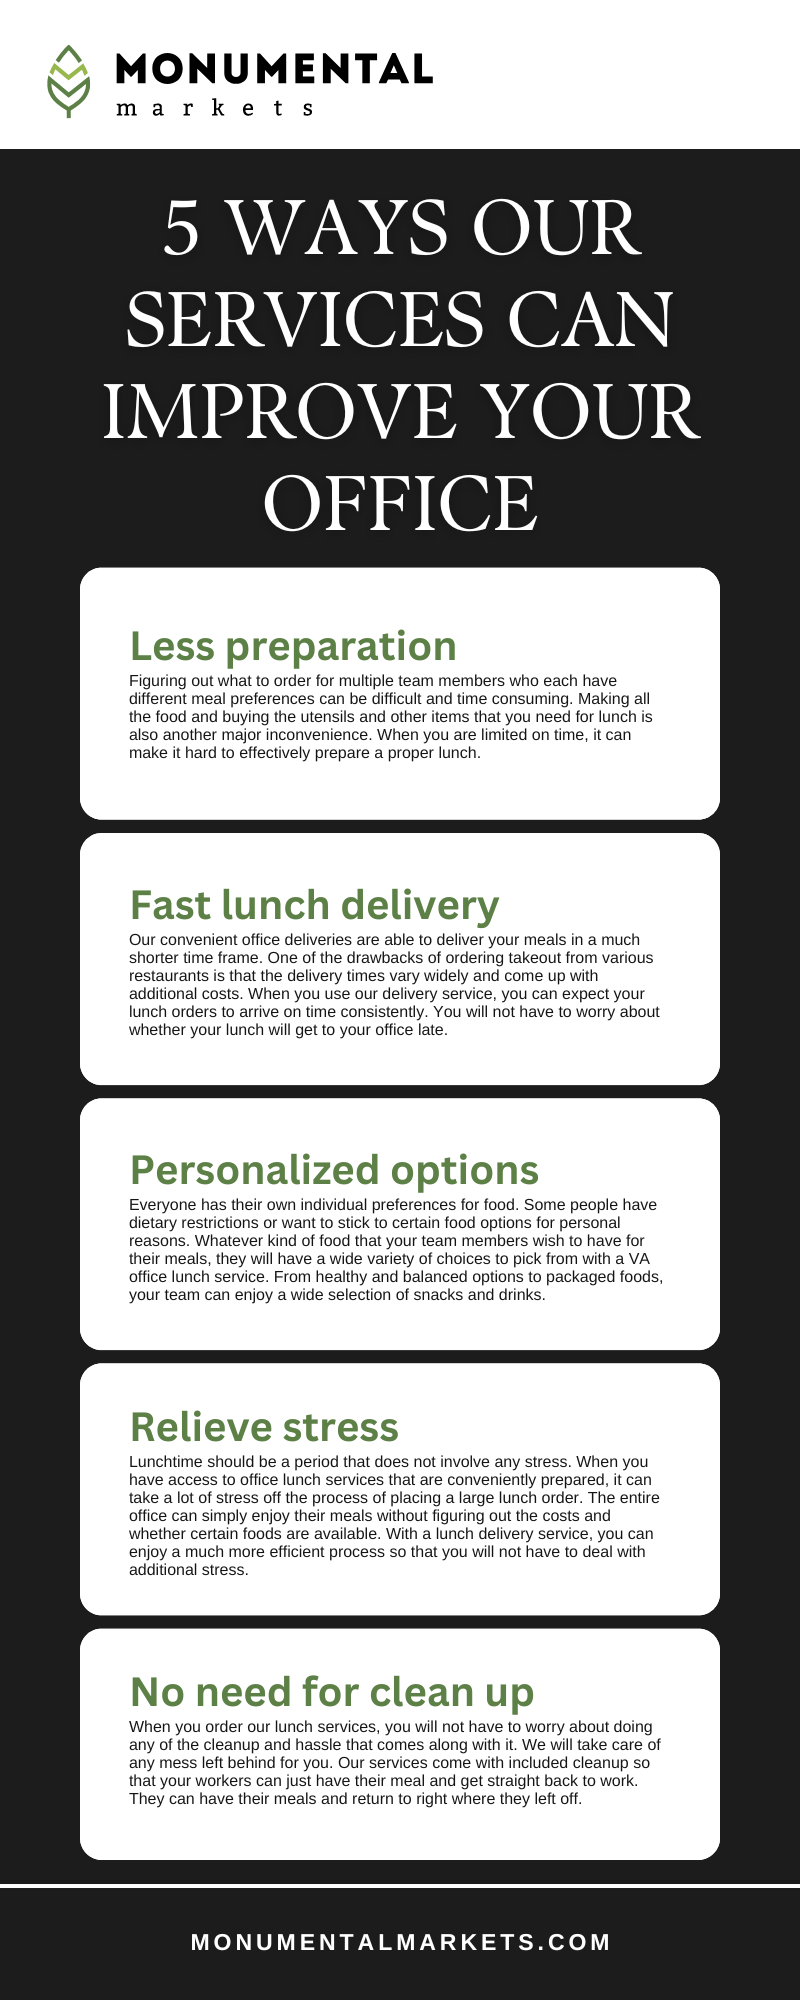 5 Ways Our Services Can Improve Your Office Infographic